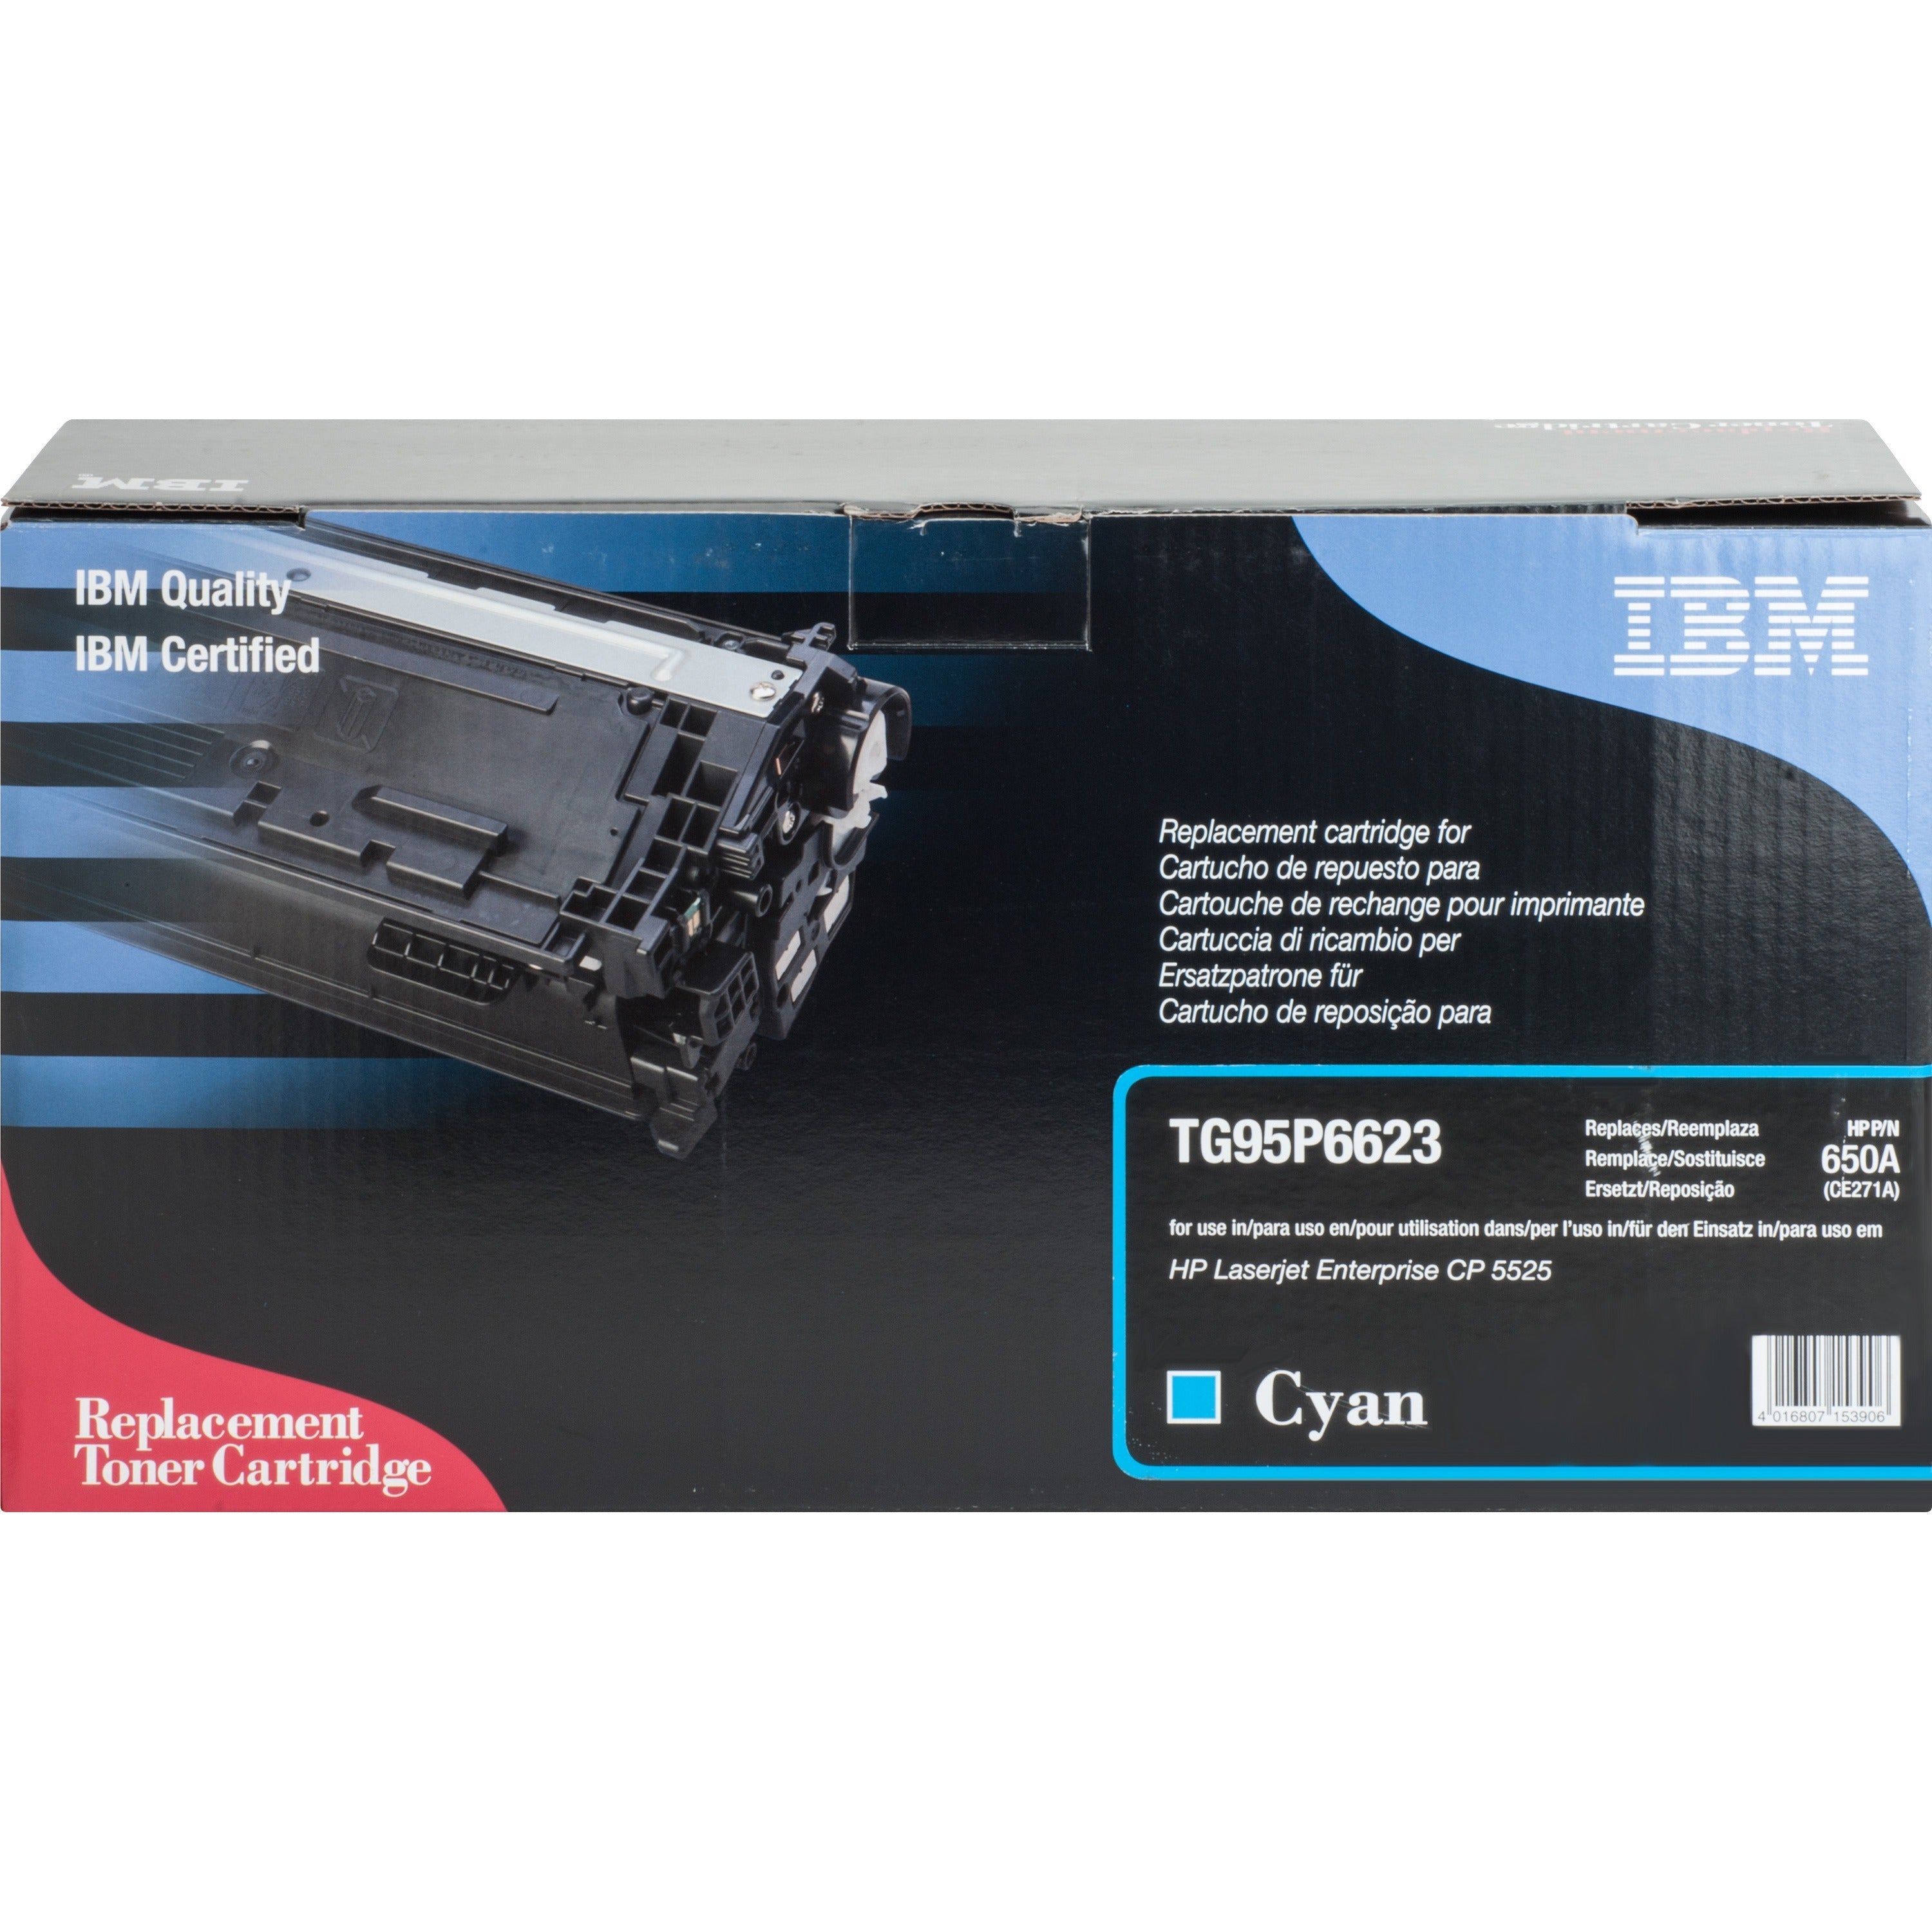 ibm-remanufactured-laser-toner-cartridge-alternative-for-hp-650a-ce271a-cyan-1-each-15000-pages_ibmtg95p6623 - 1